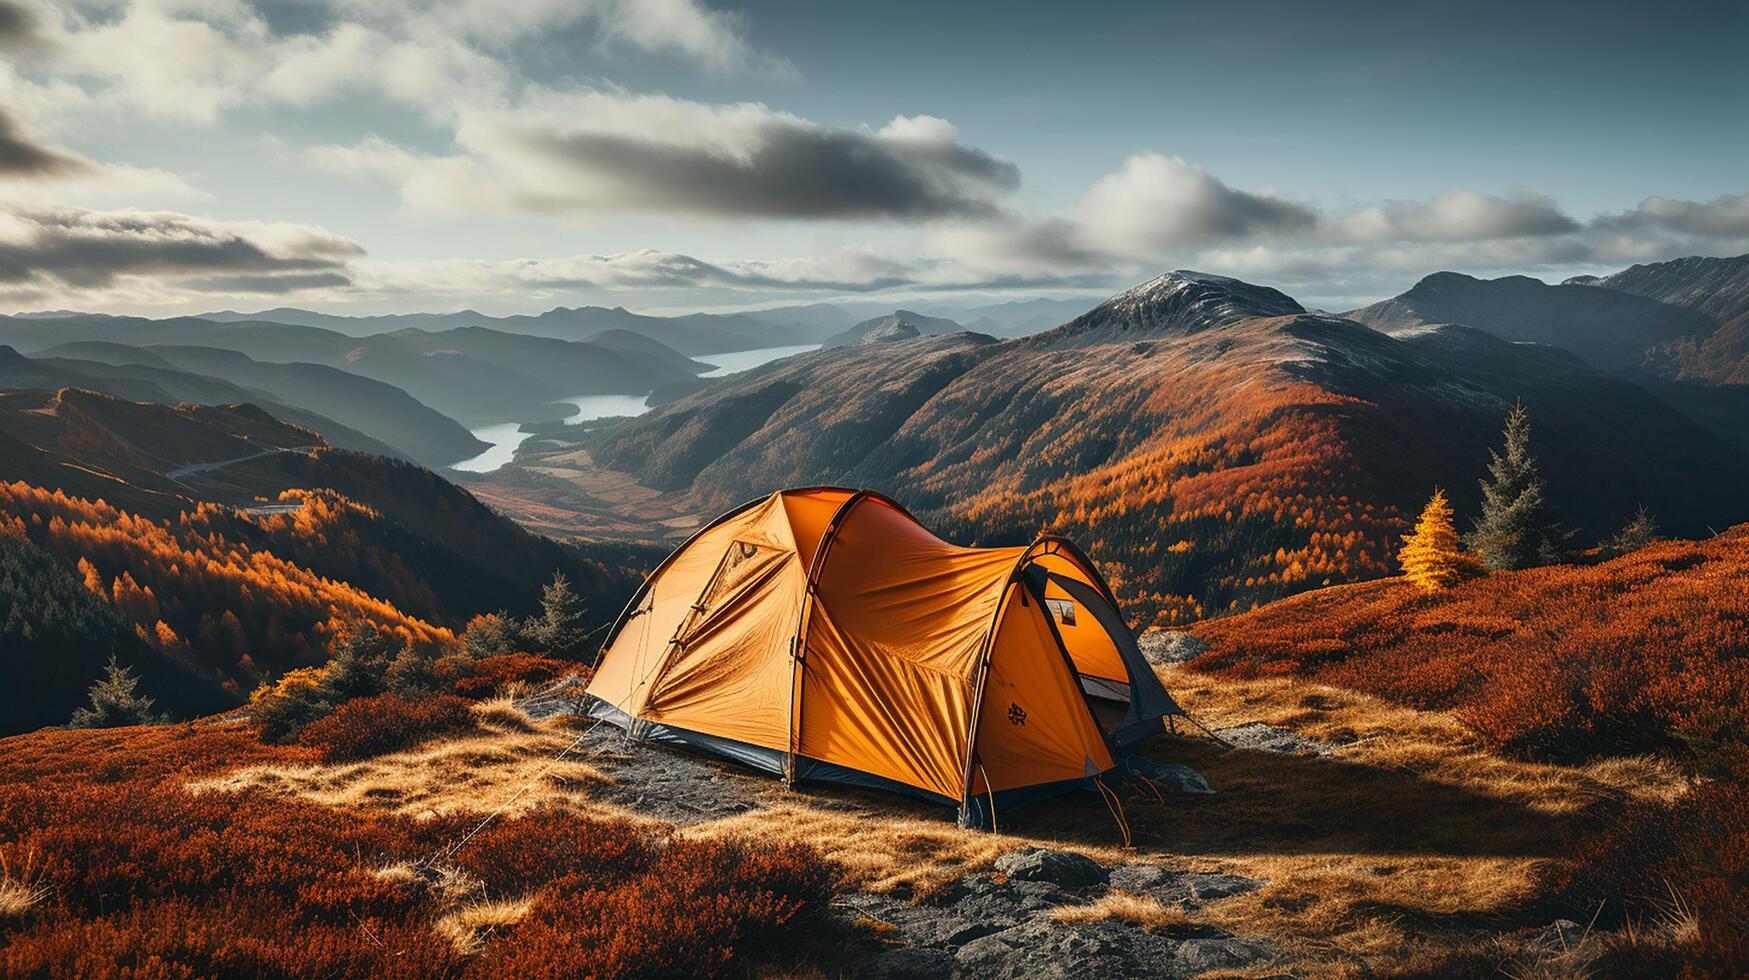 AI generated Awesome camping in top of mountain. Lonely Green tent is hidden in a mountain forest among red dwarf birch bushes. Tourism concept adventure voyage outdoor photo